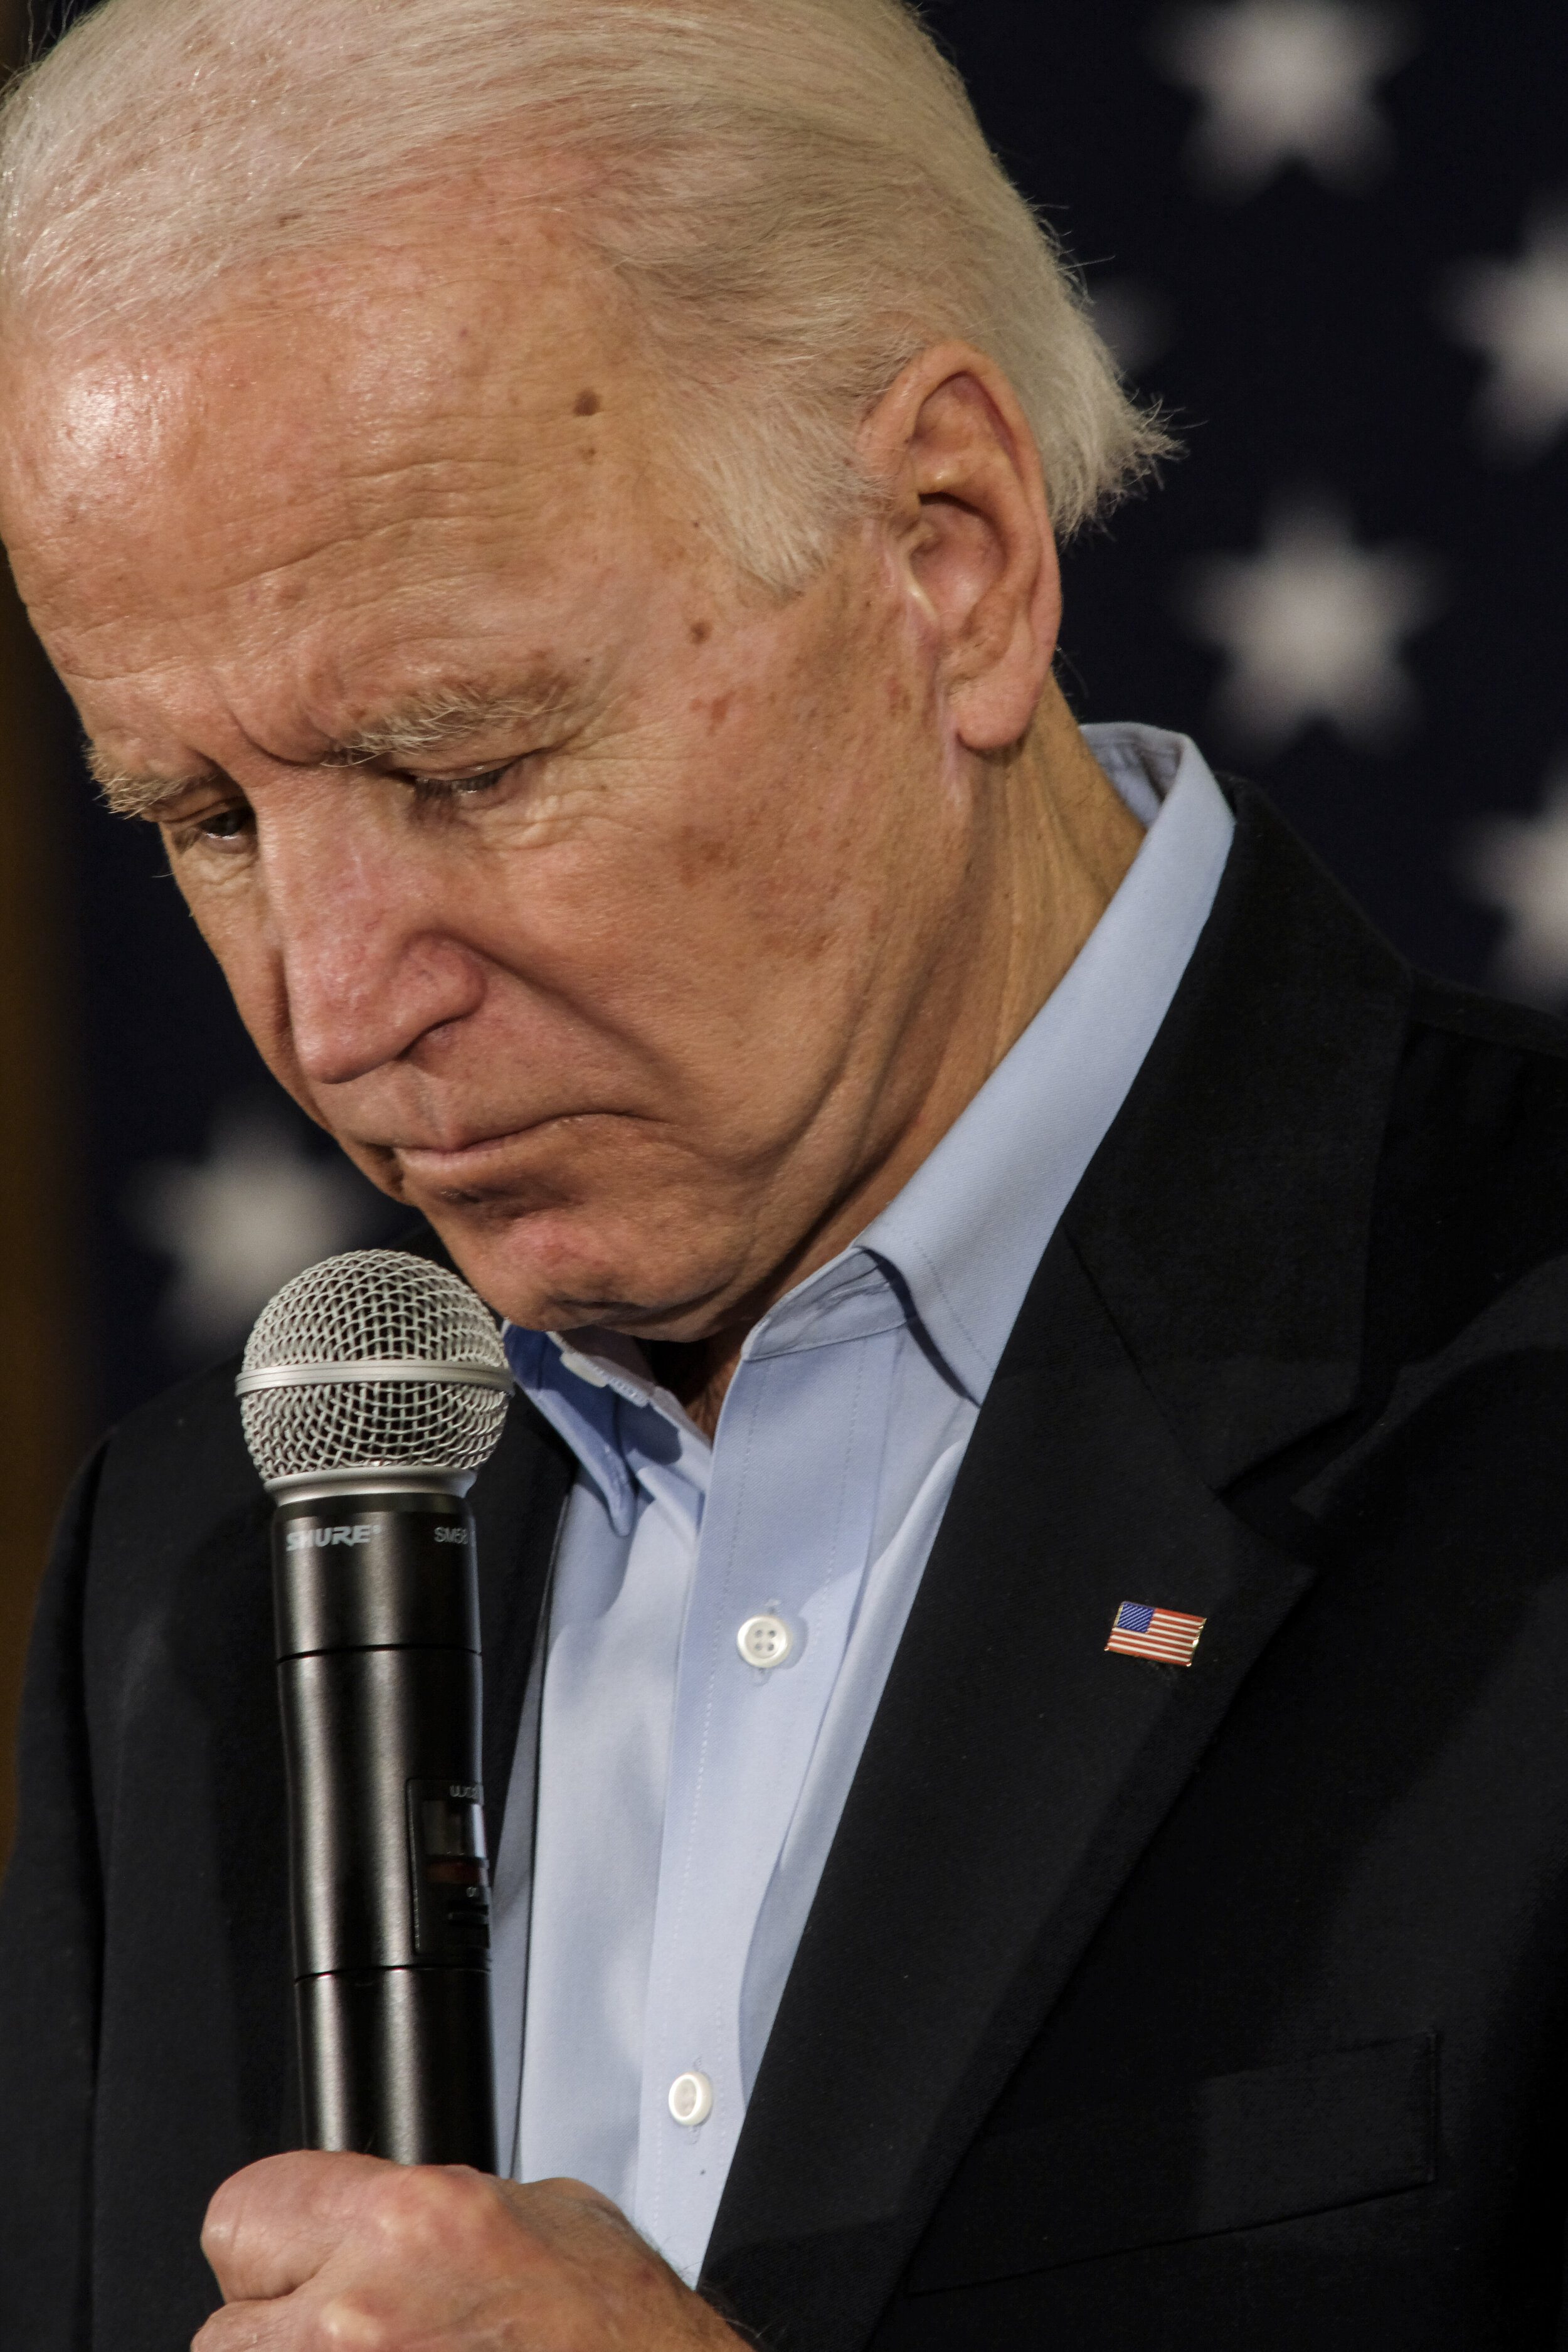  Former Vice President Joe Biden delivers a speech during a small rally in Fort Madison, Iowa on February 1, 2020. 